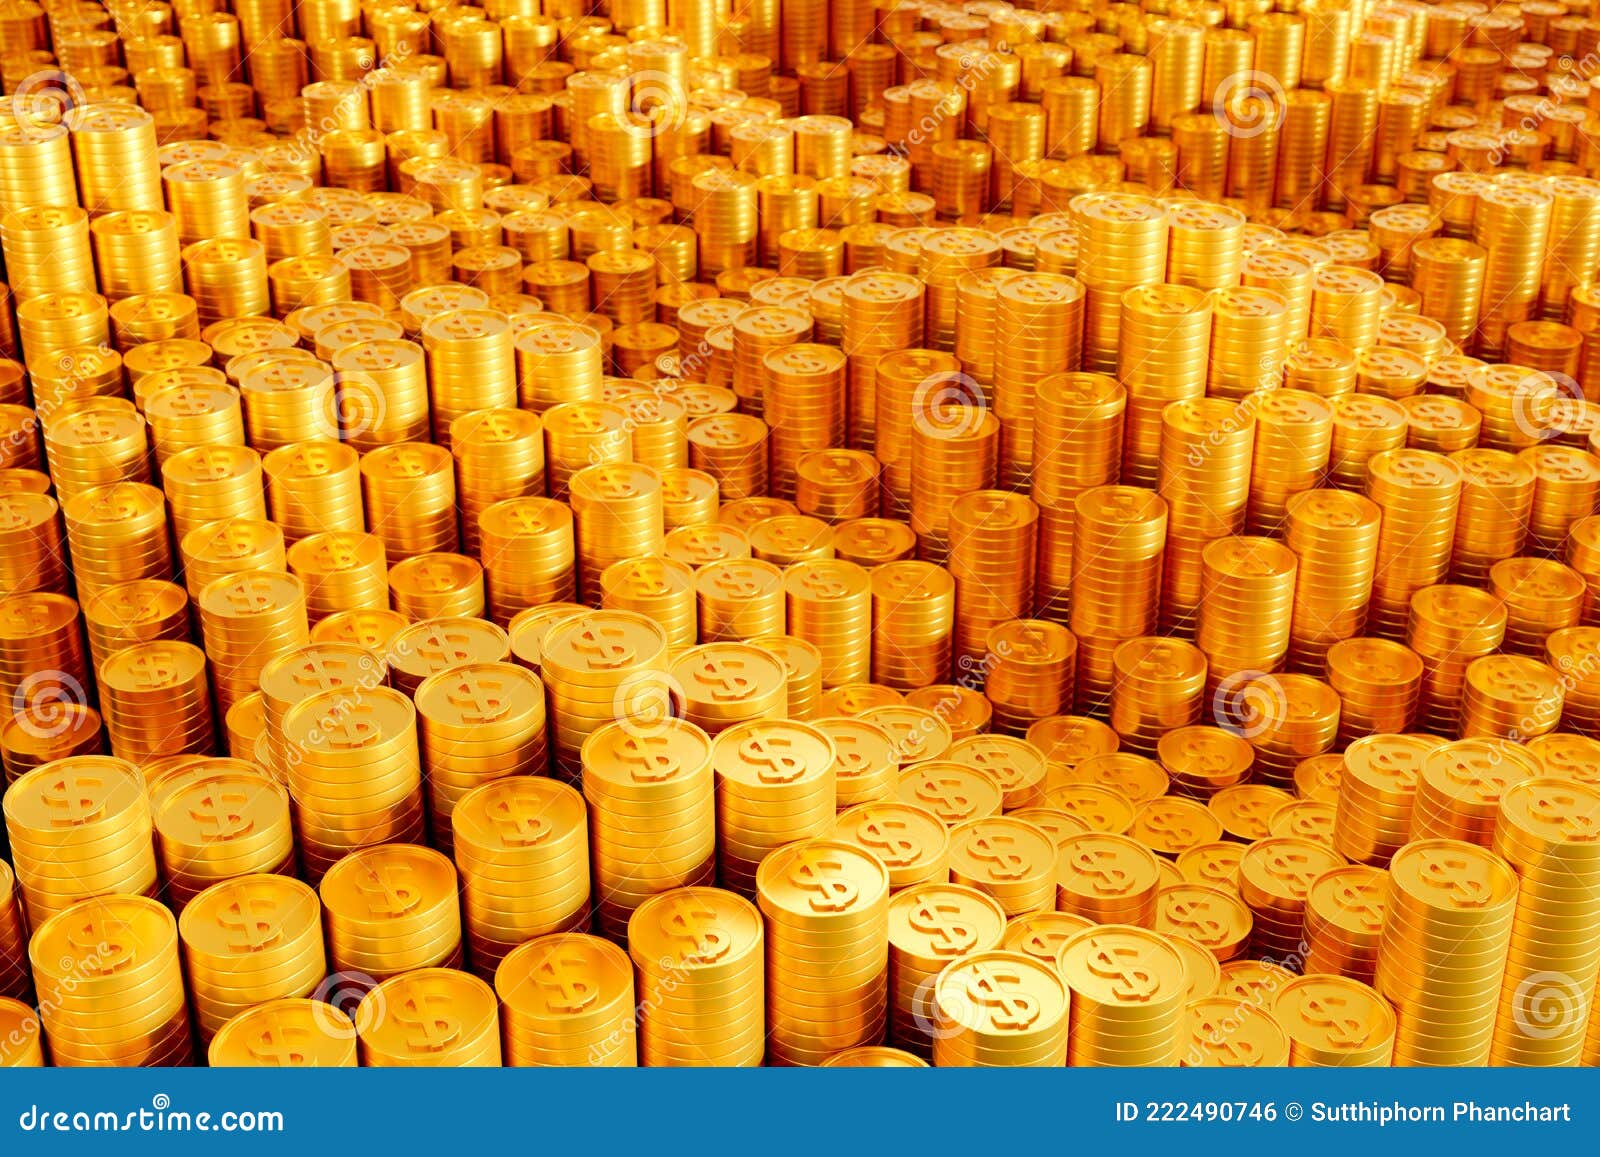 gold dollar coins arranged in rows. can be used as a background related to finance and business .3d render